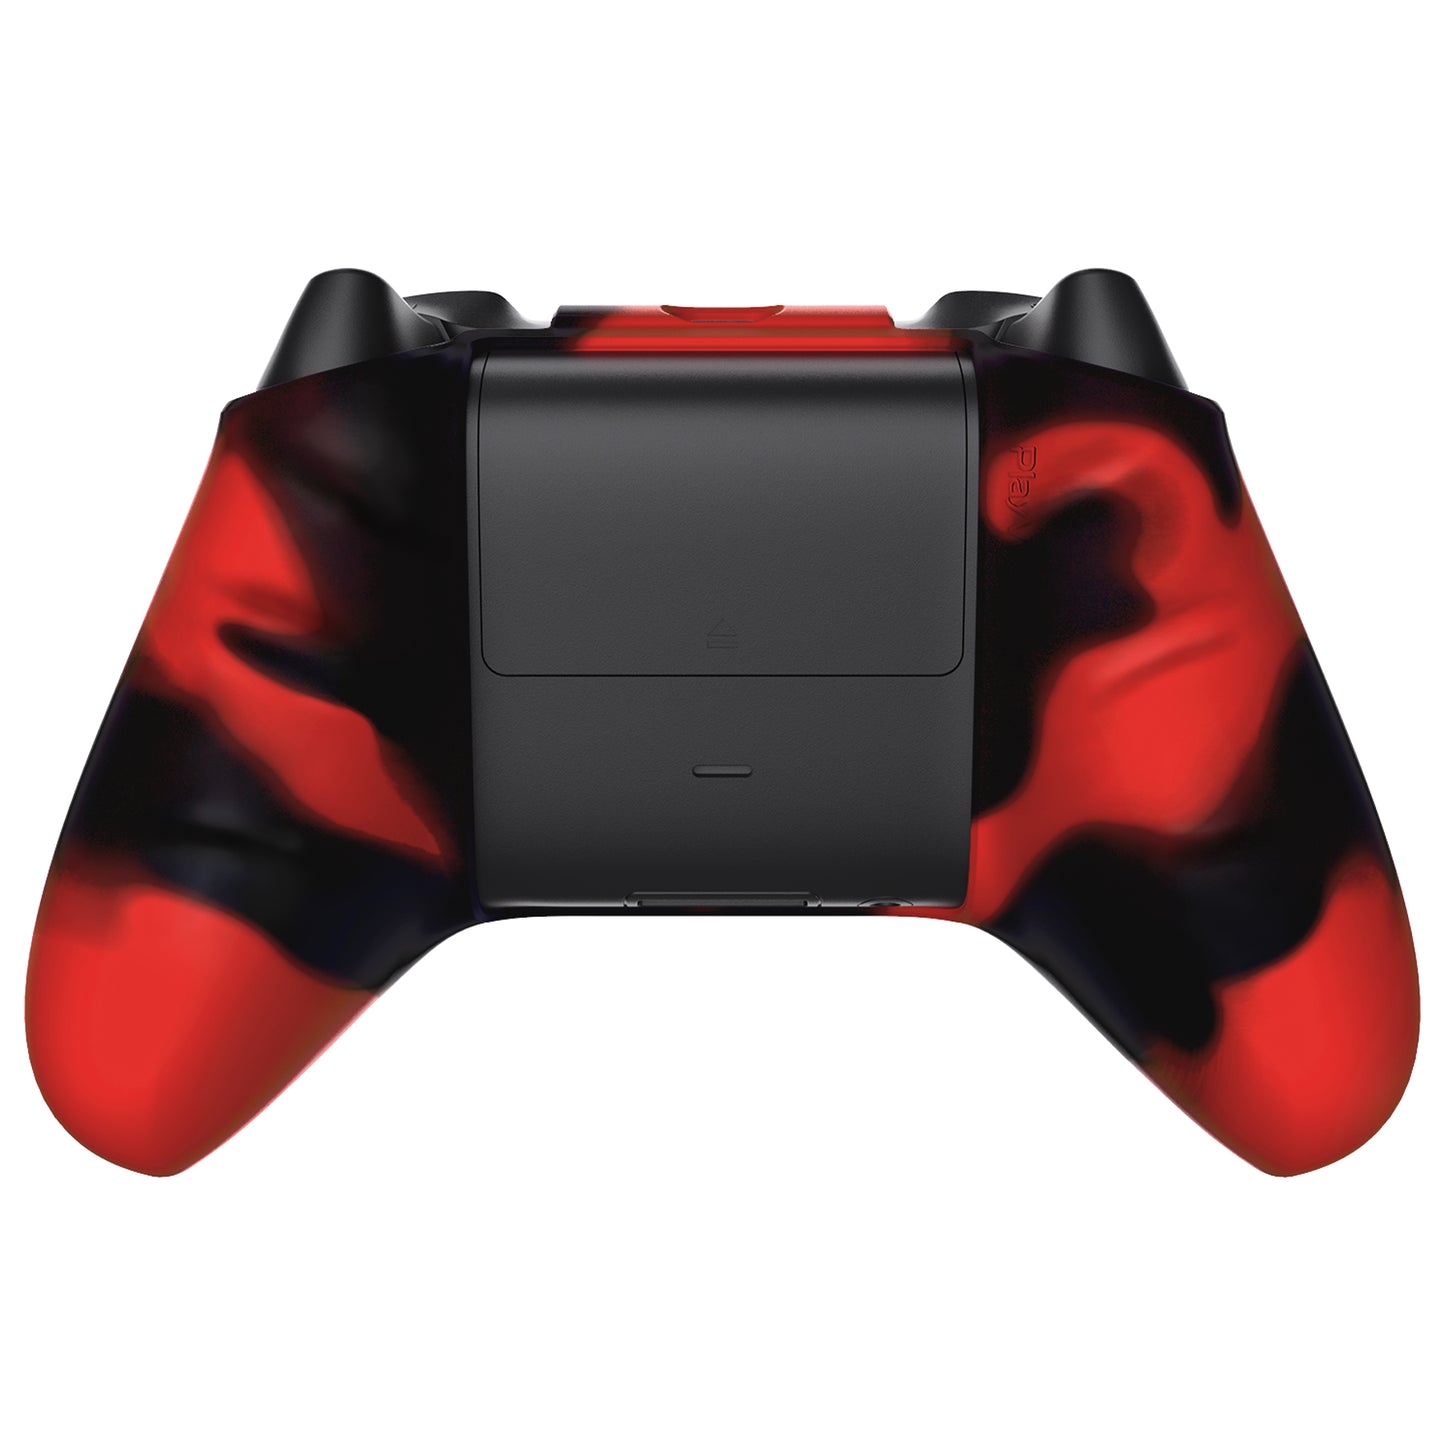 PlayVital Camouflage Soft Anti-Slip Silicone Cover for Xbox Series X Controller, Rubber Case Protector for Xbox Series S Controller with Black Thumb Grip Caps - Red & Black - BLX3024 PlayVital